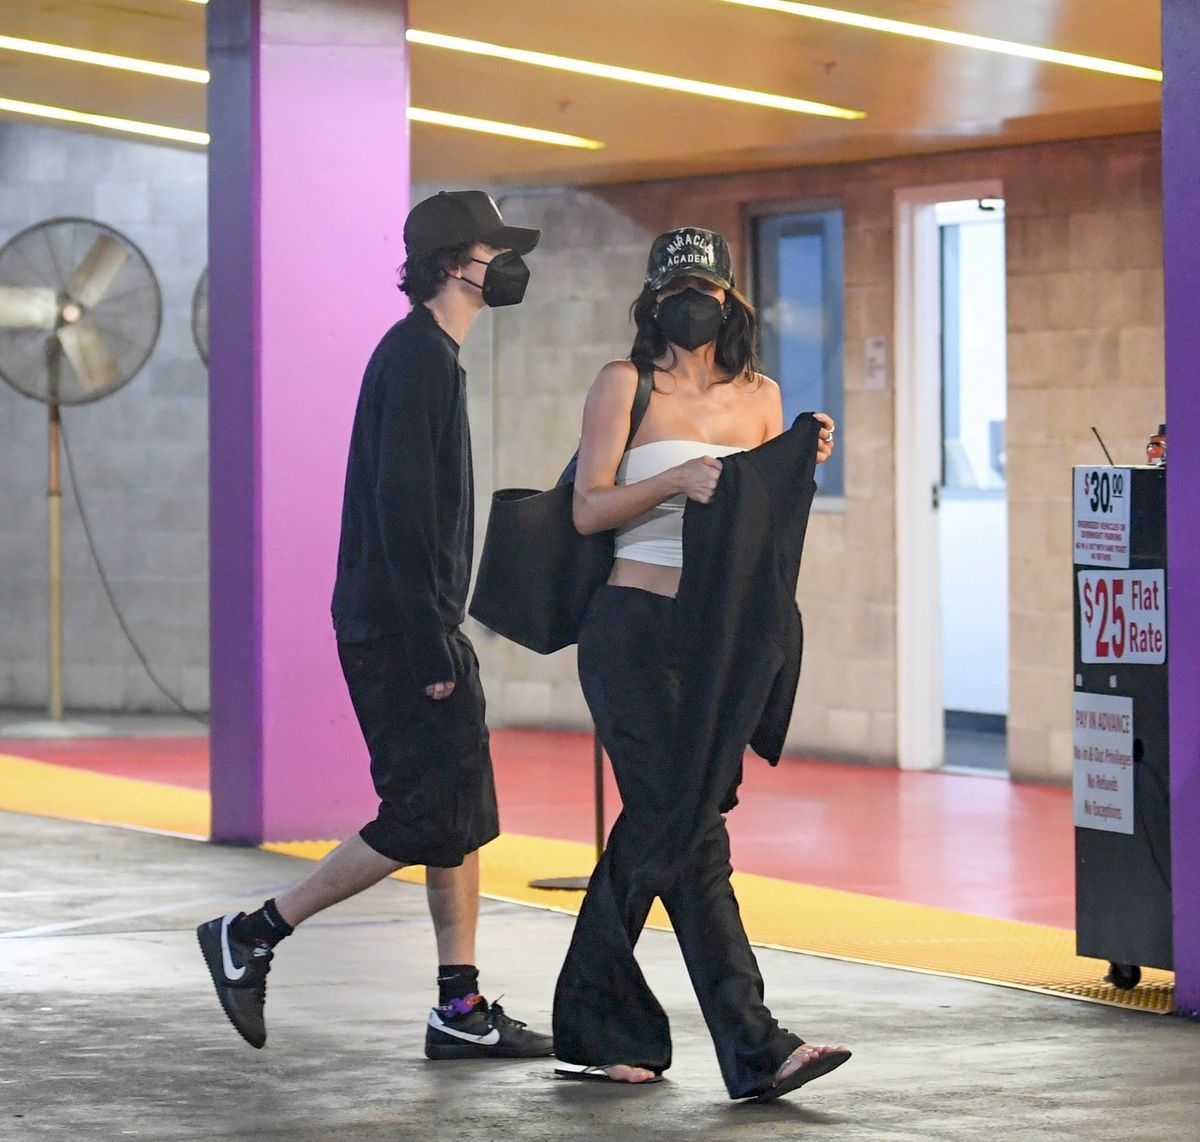 Still going strong! Kylie Jenner and actor Timothée Chalamet keep a low profile with baseball caps and face masks on as they are spotted heading to the Grauman's Chinese Theatre to watch a movie on romantic date night in Los Angeles. 